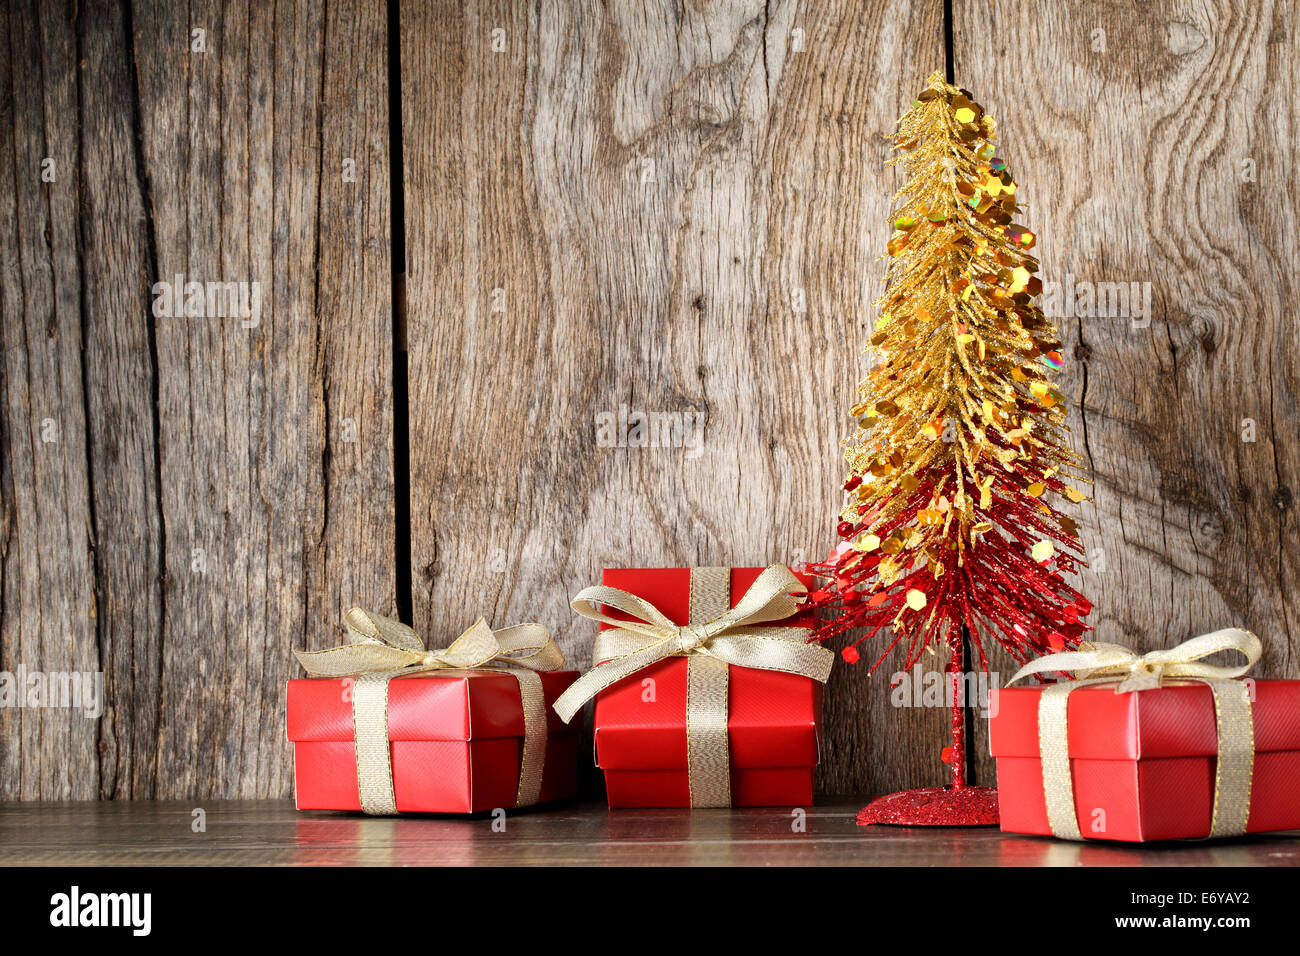 Gift boxes and Christmas tree on grunge wood background Stock Photo